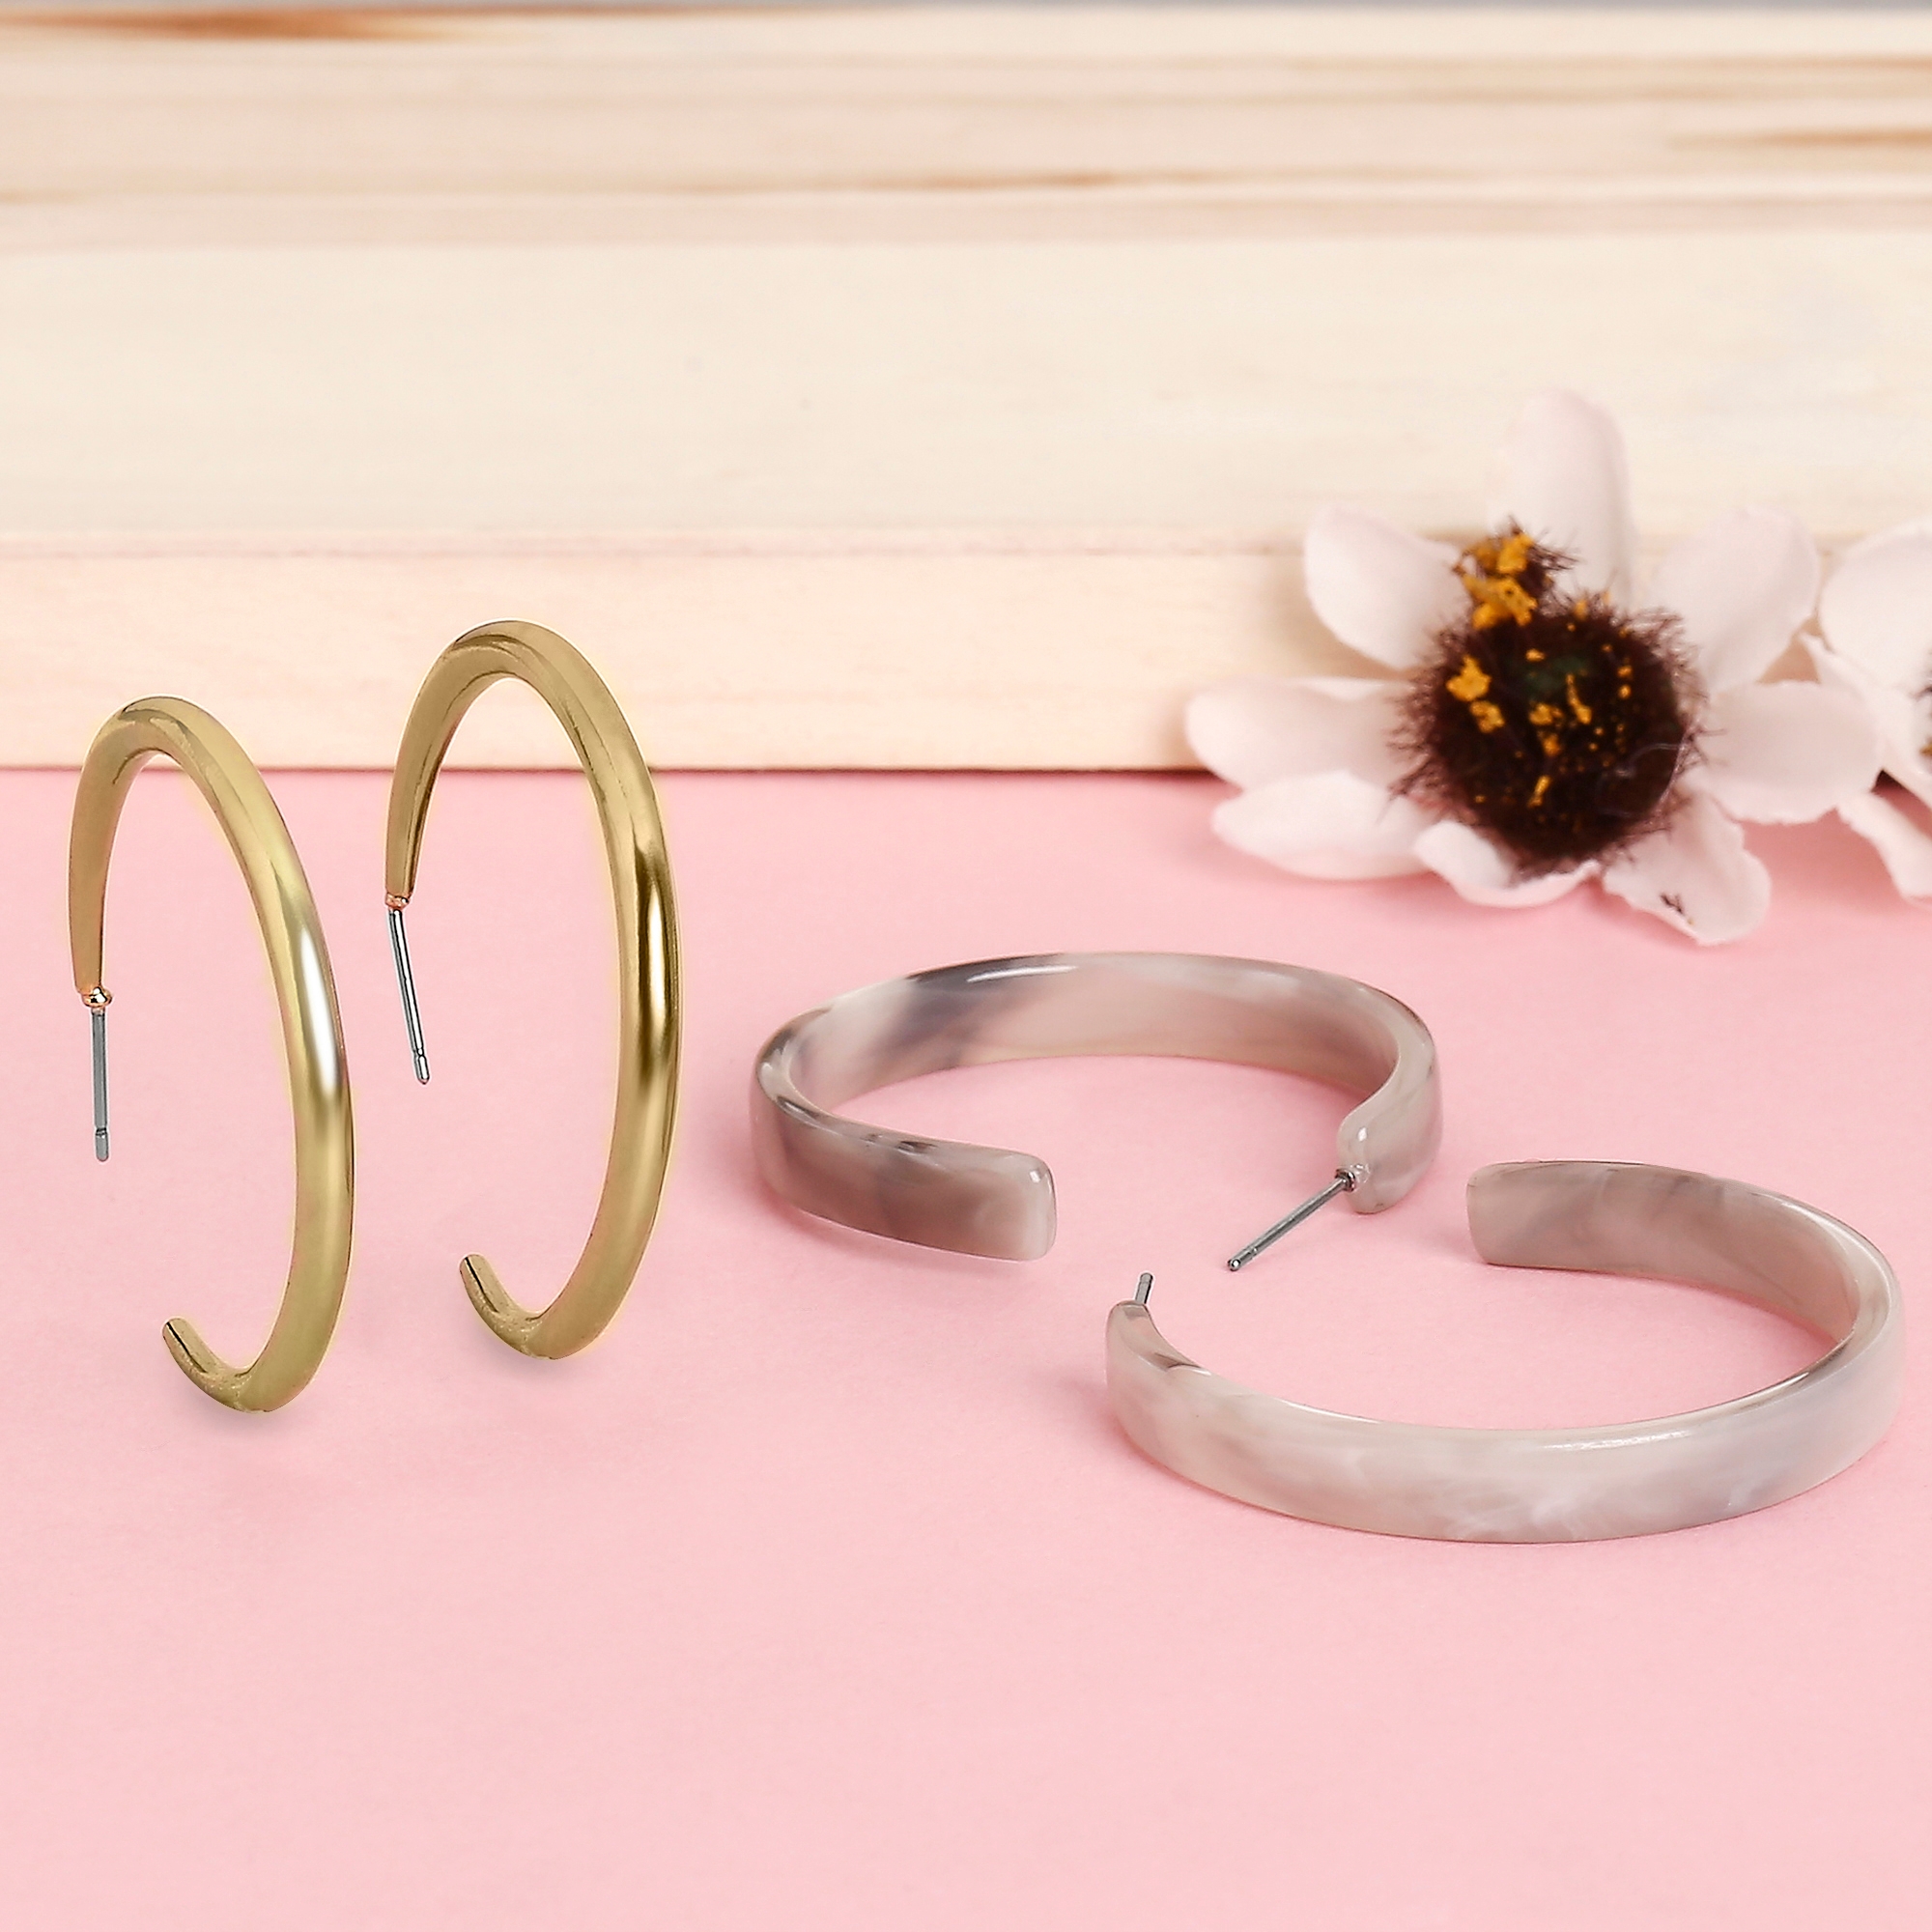 Lilly & sparkle | Lilly & Sparkle Gold and grey hoop set of 2 || Earrings For women and girls